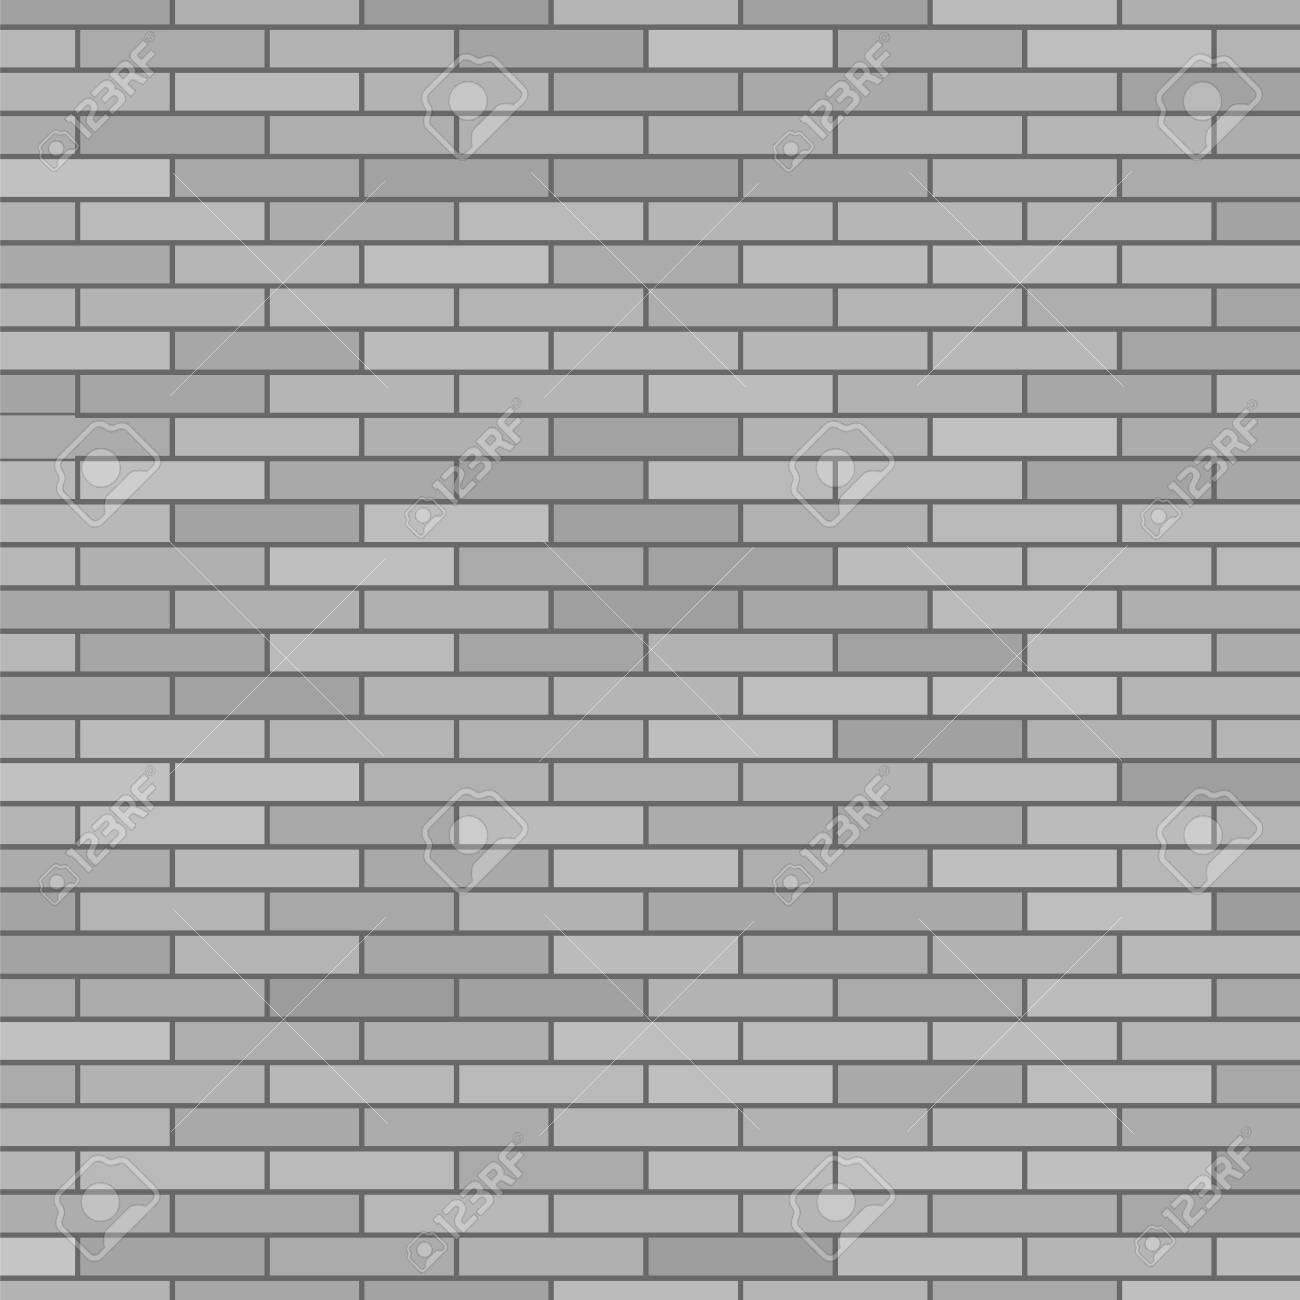 Free Download Grey Brick Wall Brick Texture Grey Brick Background Stock Photo 1300x1300 For Your Desktop Mobile Tablet Explore 45 Brick Background Wallpaper Brick Brick Wallpaper Brick Background - brick texture grey brick wall roblox